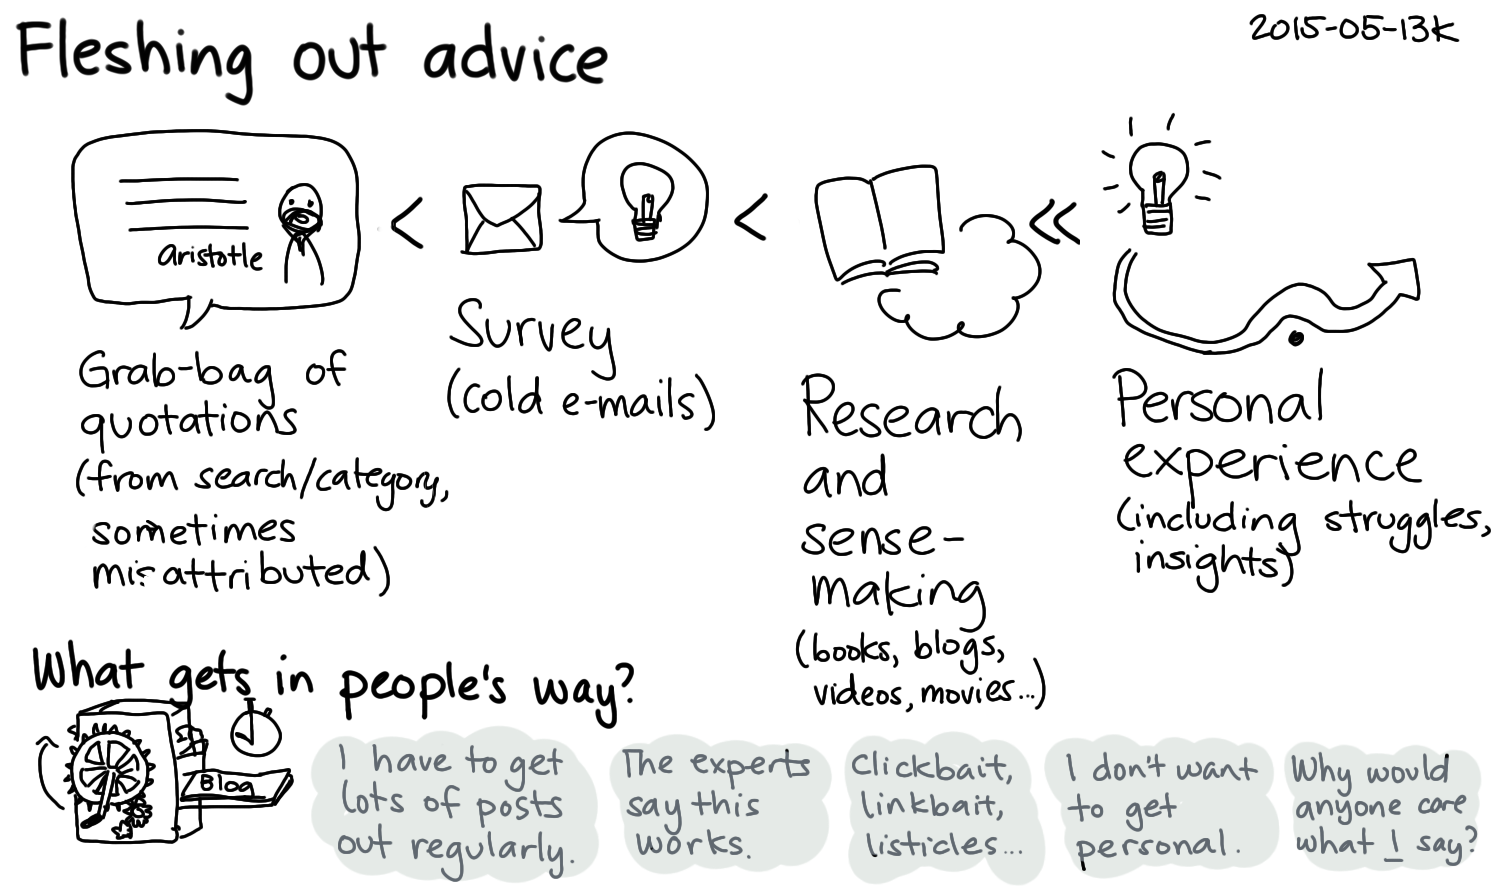 2015-05-13k Fleshing out advice -- index card #blogging #advice #sharing.png